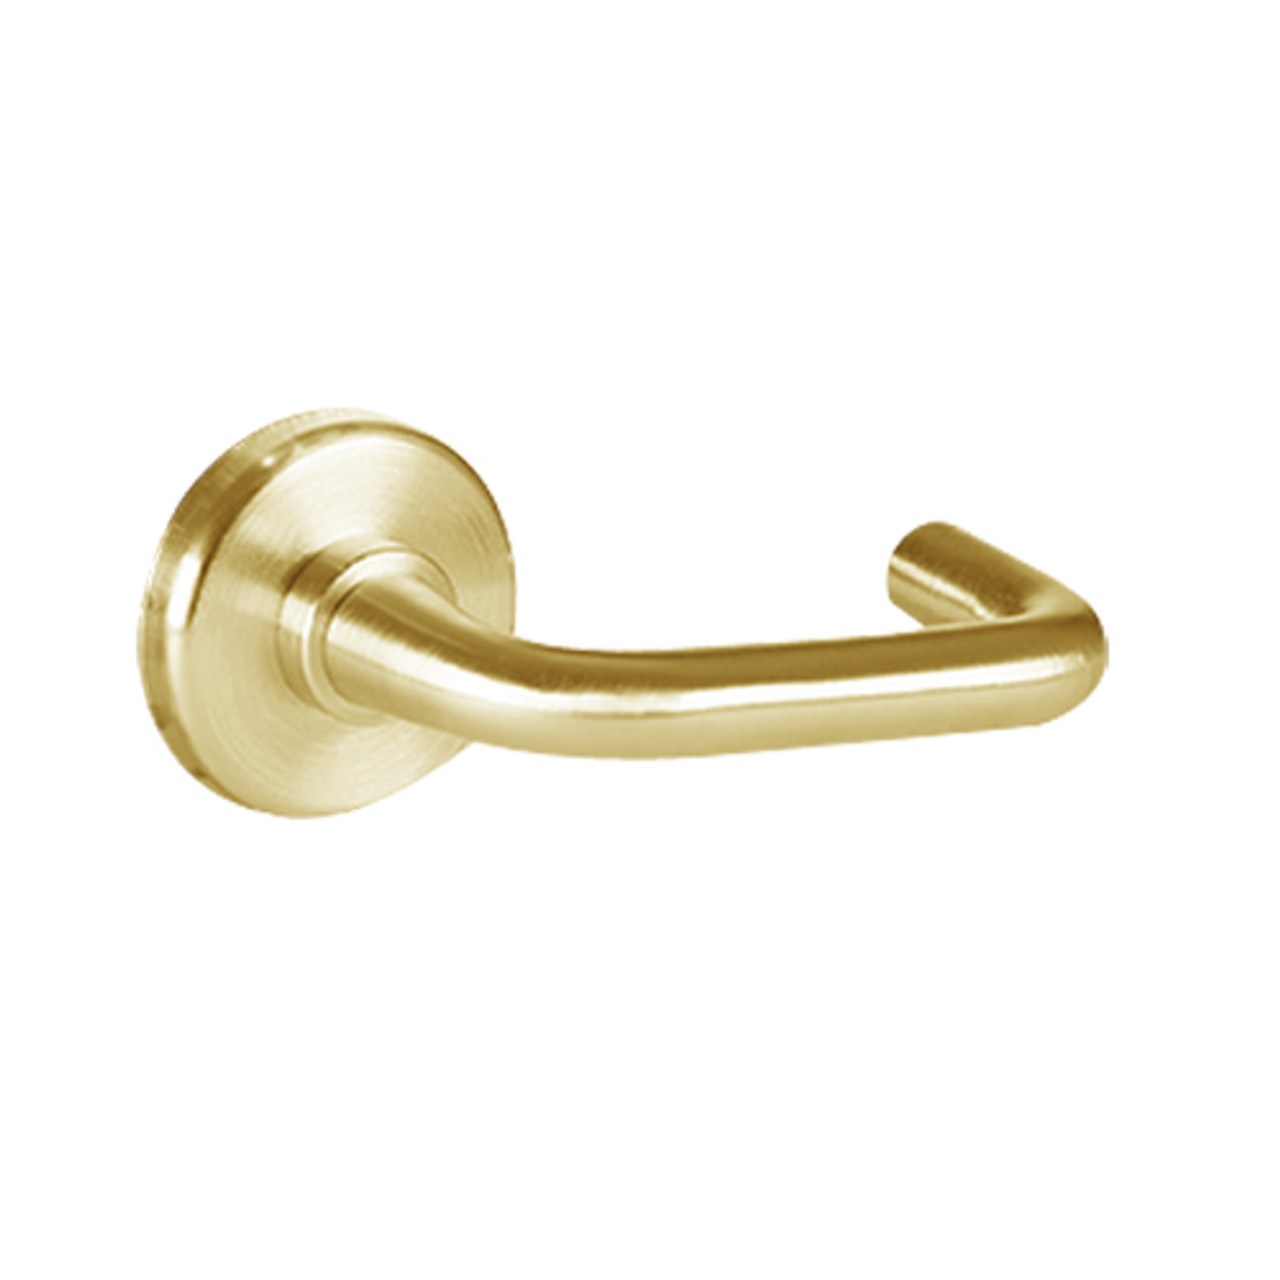 40HTKIS33R606 Best 40H Series Trim Kits Inside Lever w/ Cylinder with Solid Tube-Return Trim Style in Satin Brass